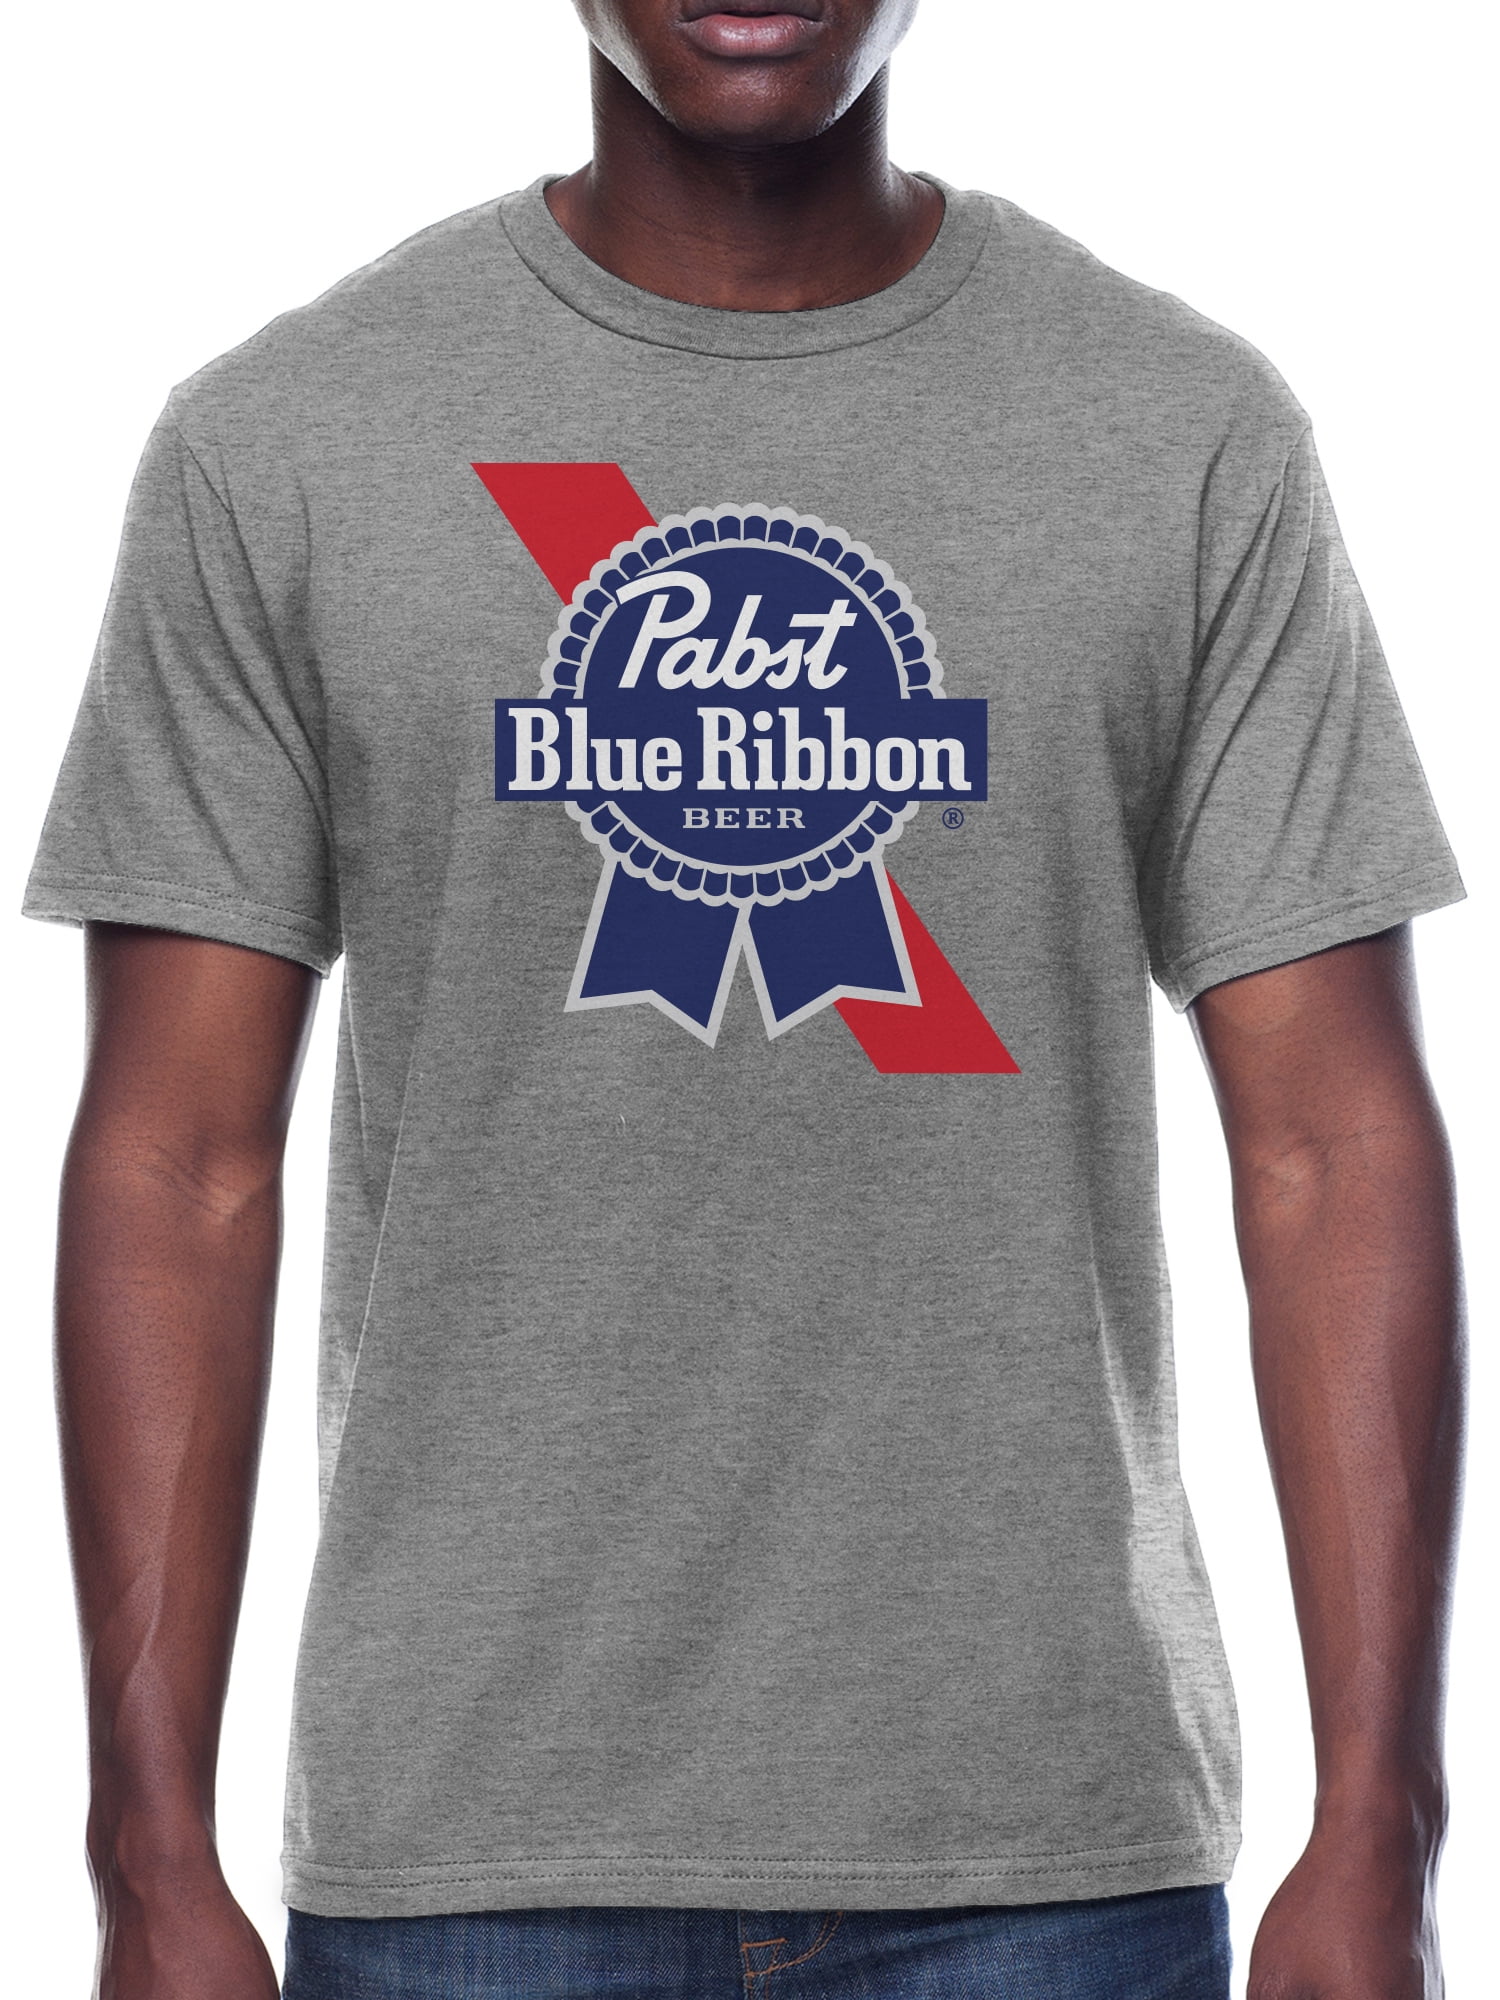 BRAND NEW Pabst Blue Ribbon PBR Beer Men's Charcoal Grey T-Shirt Large L 